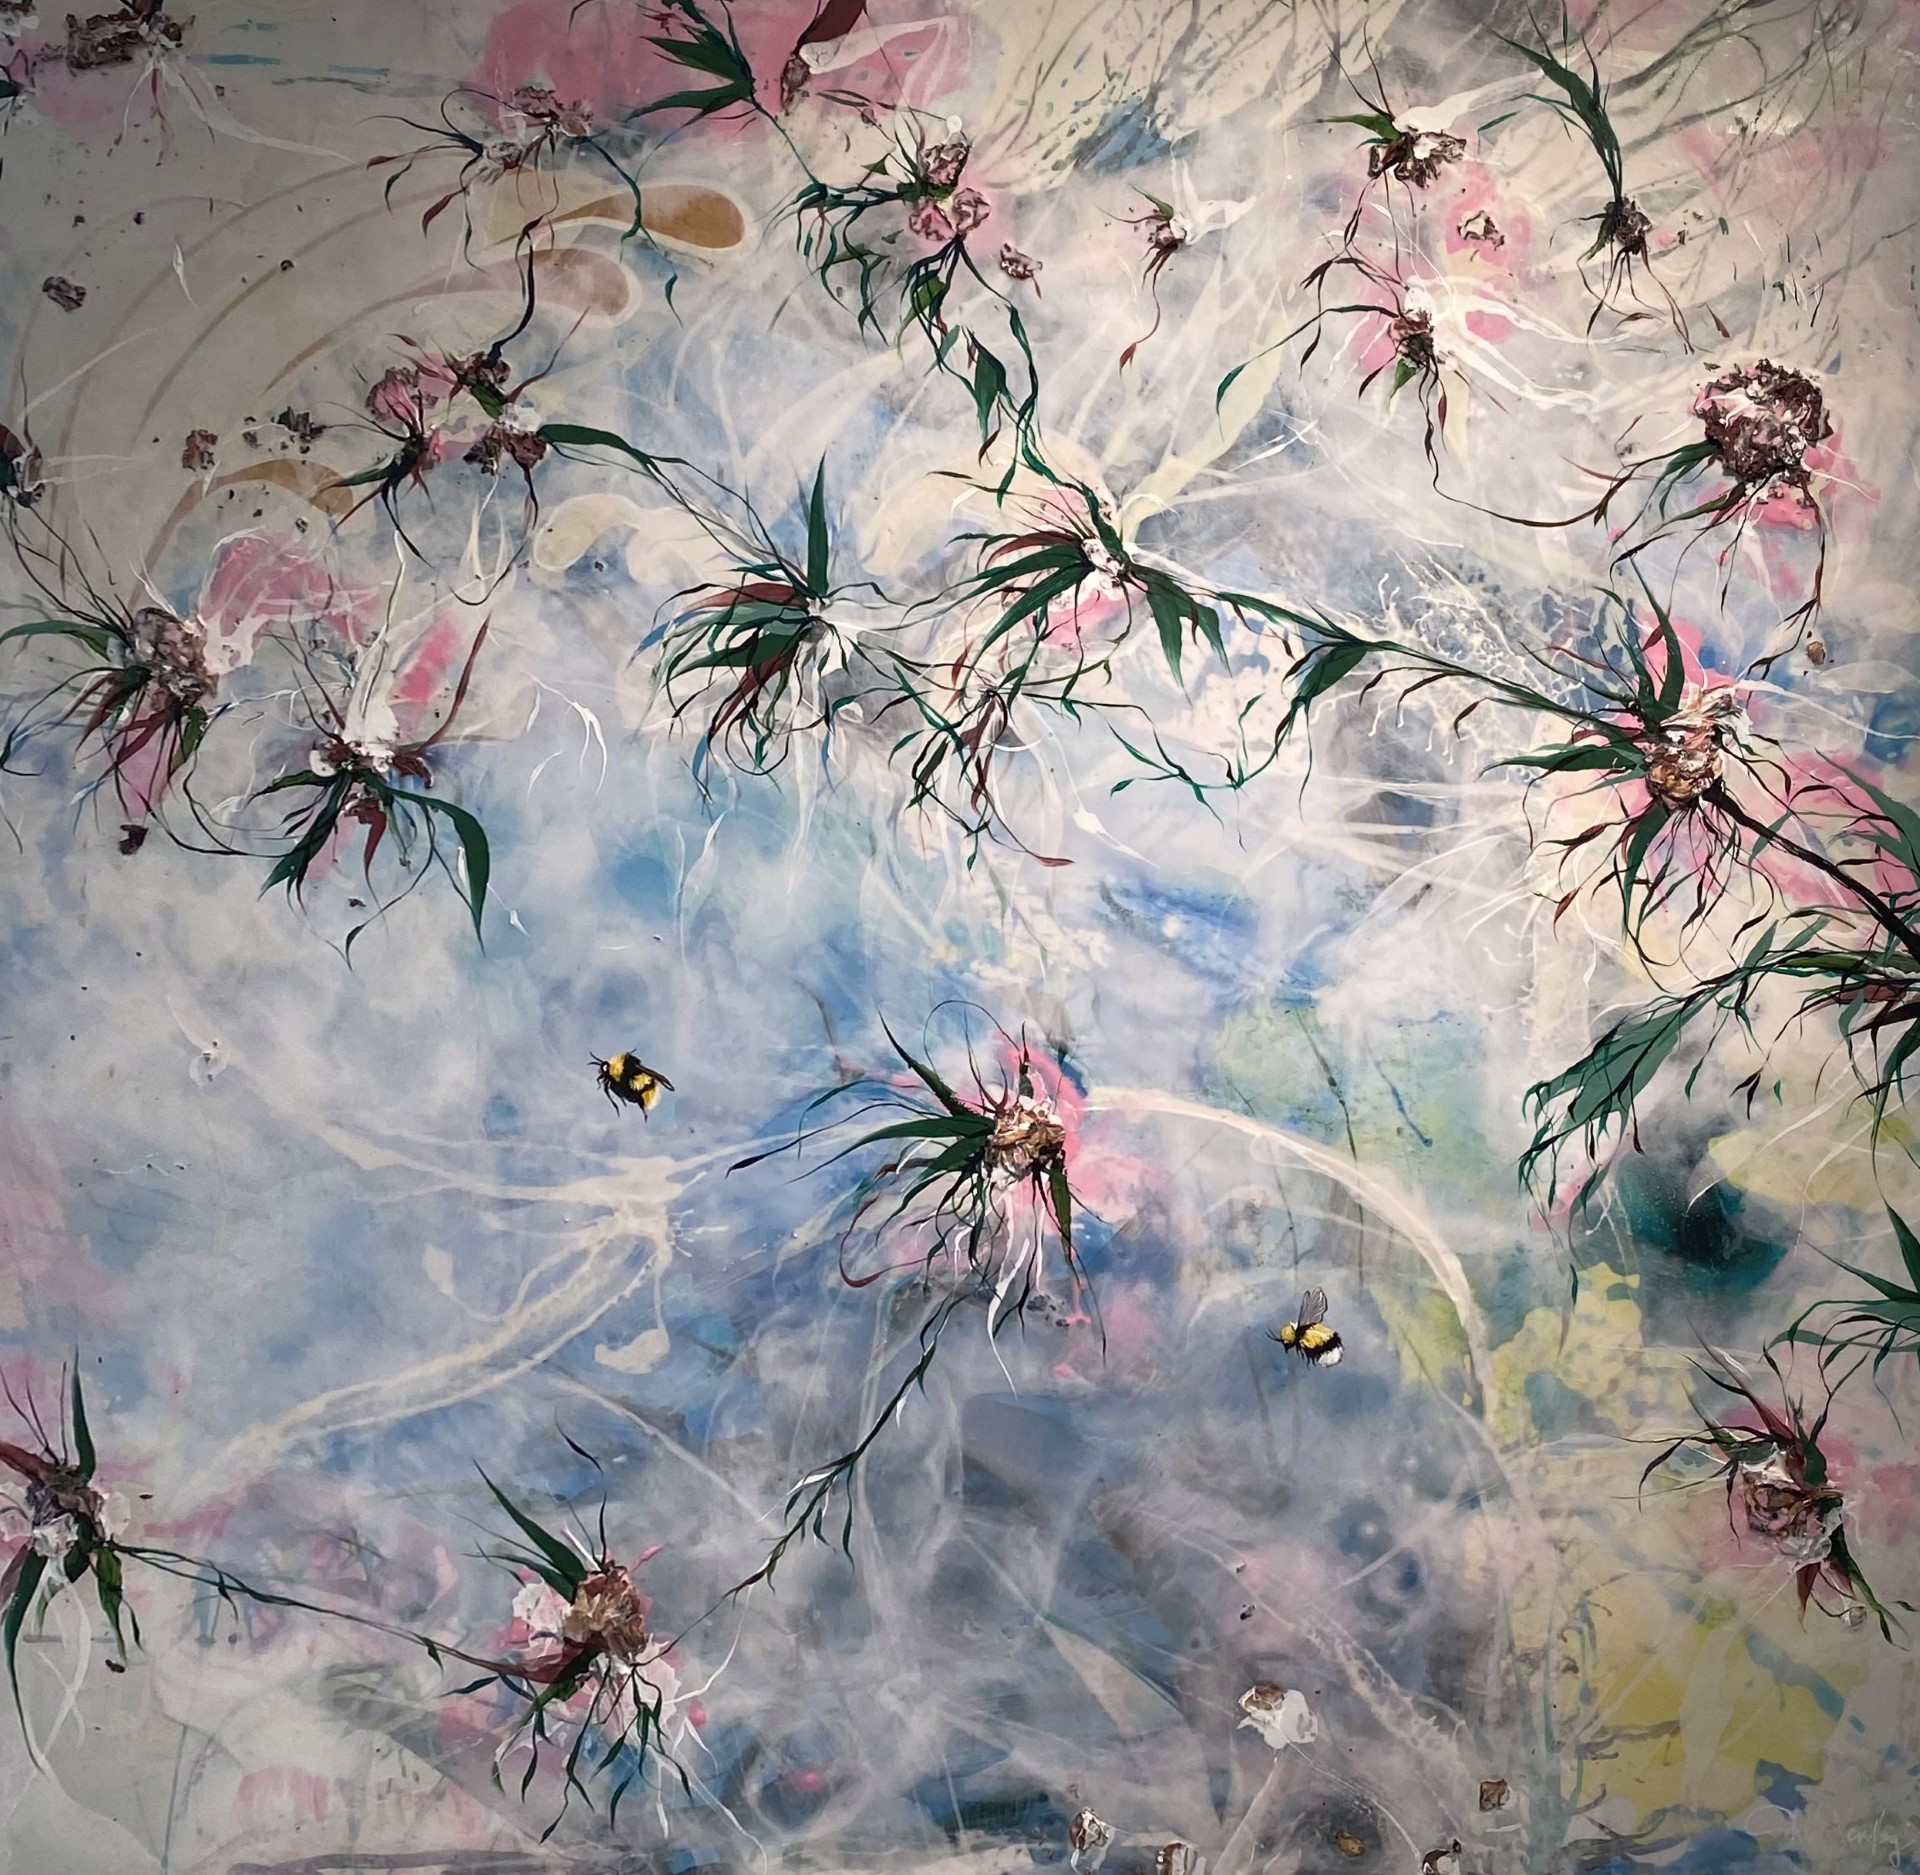 A painting with a blue and white background with black and pink vine-like flowers overtop of it